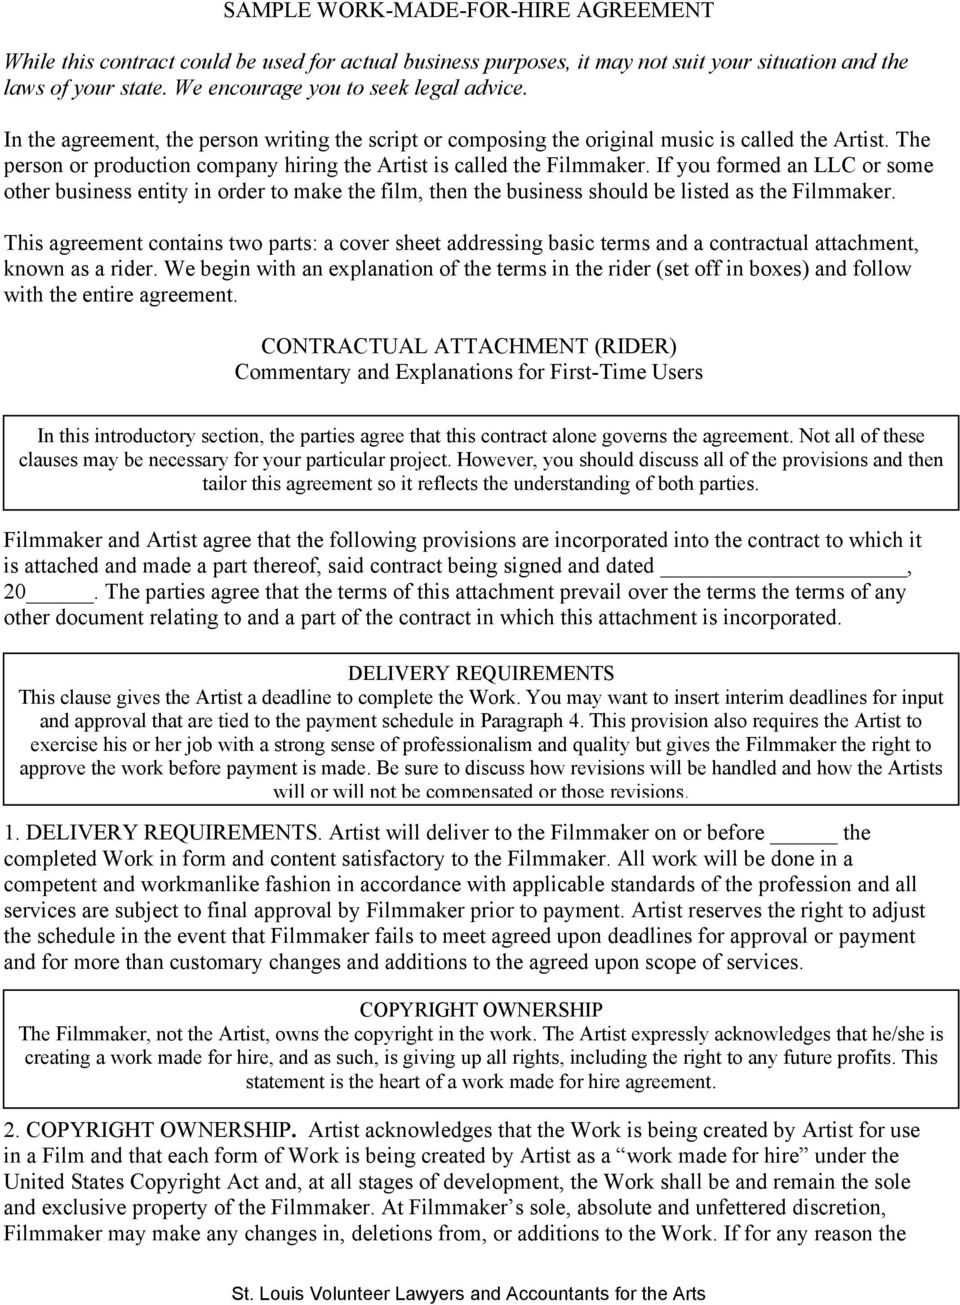 SAMPLE WORK-MADE-FOR-HIRE AGREEMENT - PDF Free Download Throughout work made for hire agreement template